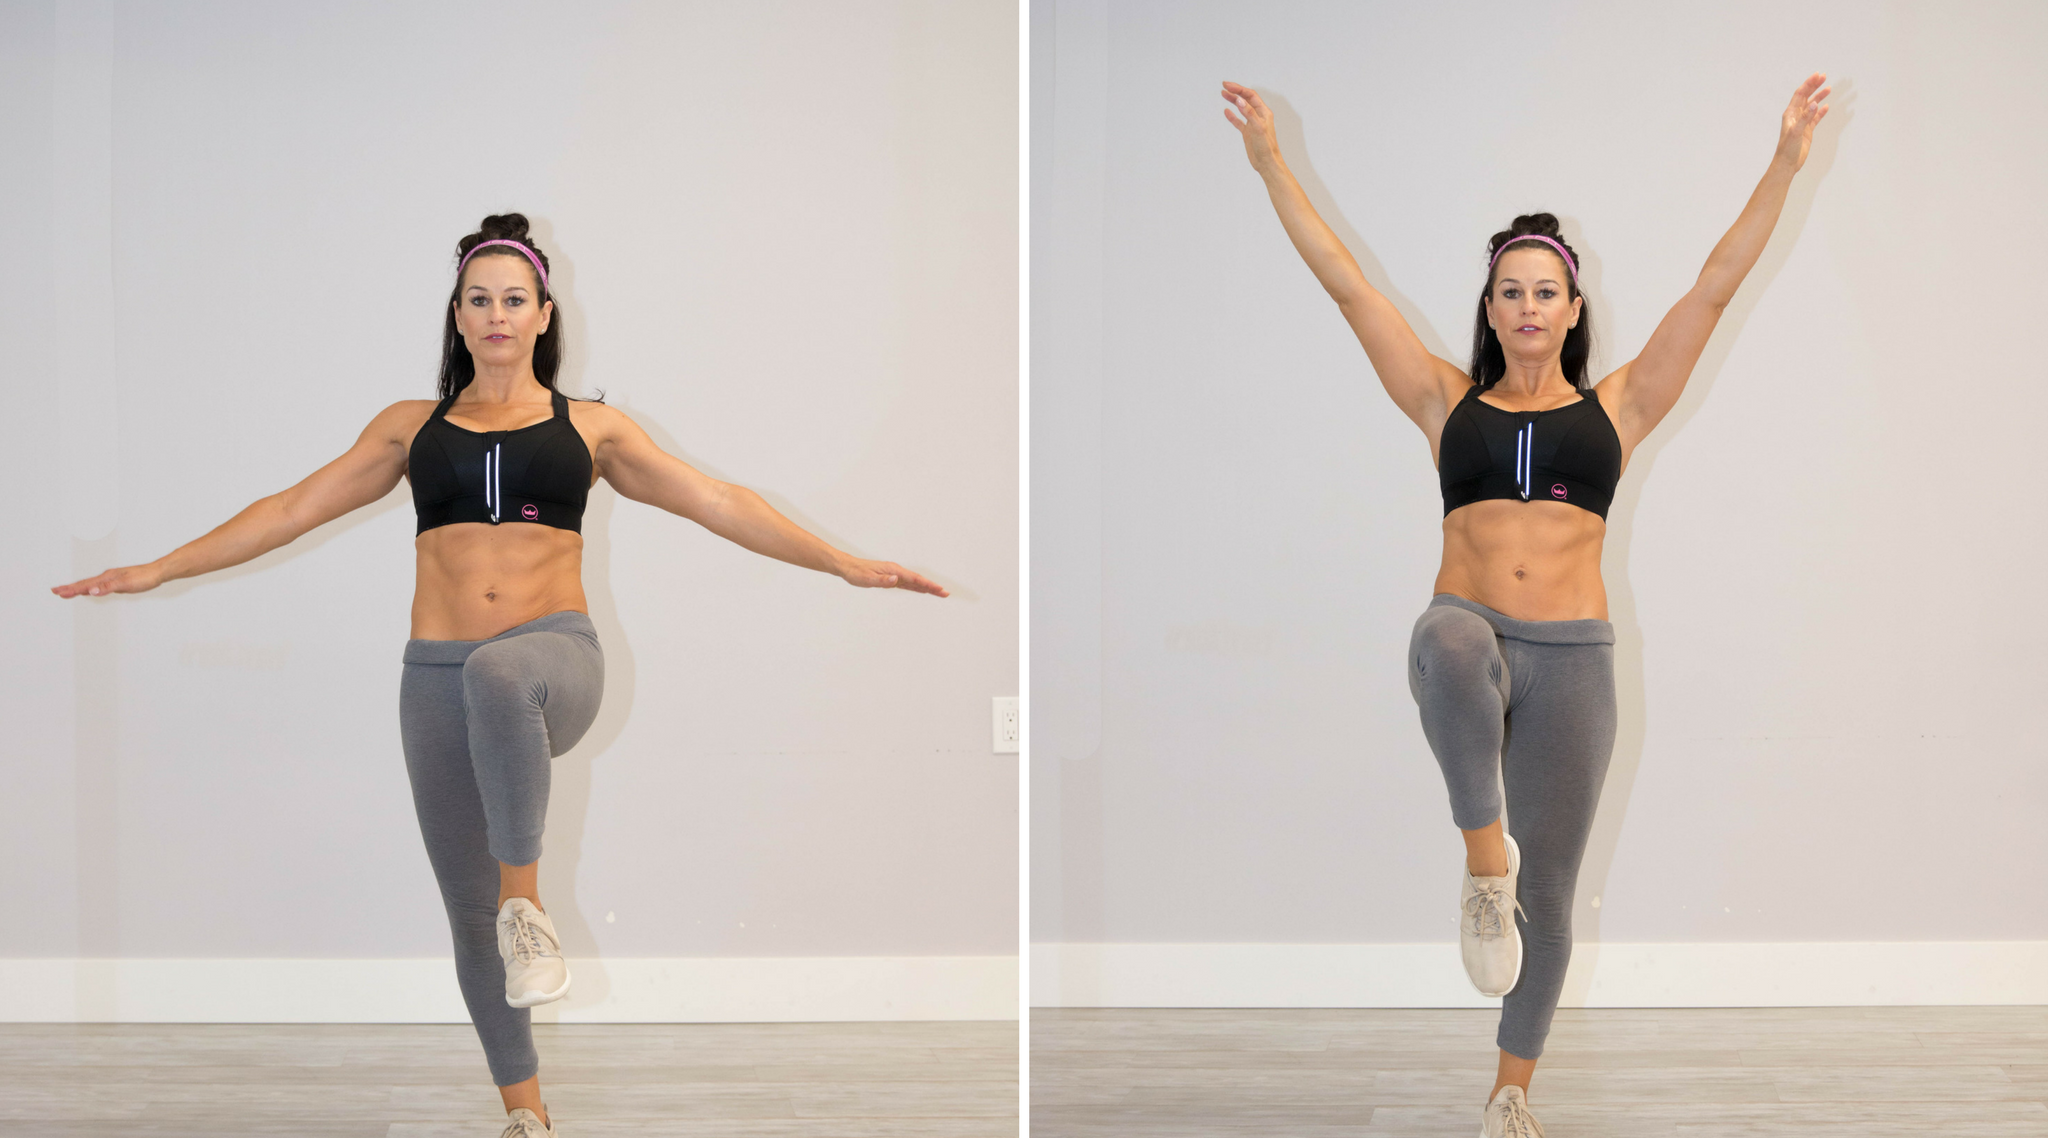 How to Get Strong, Sexy Shoulders in 12 Simple Fat-Burning Moves - SHEFIT